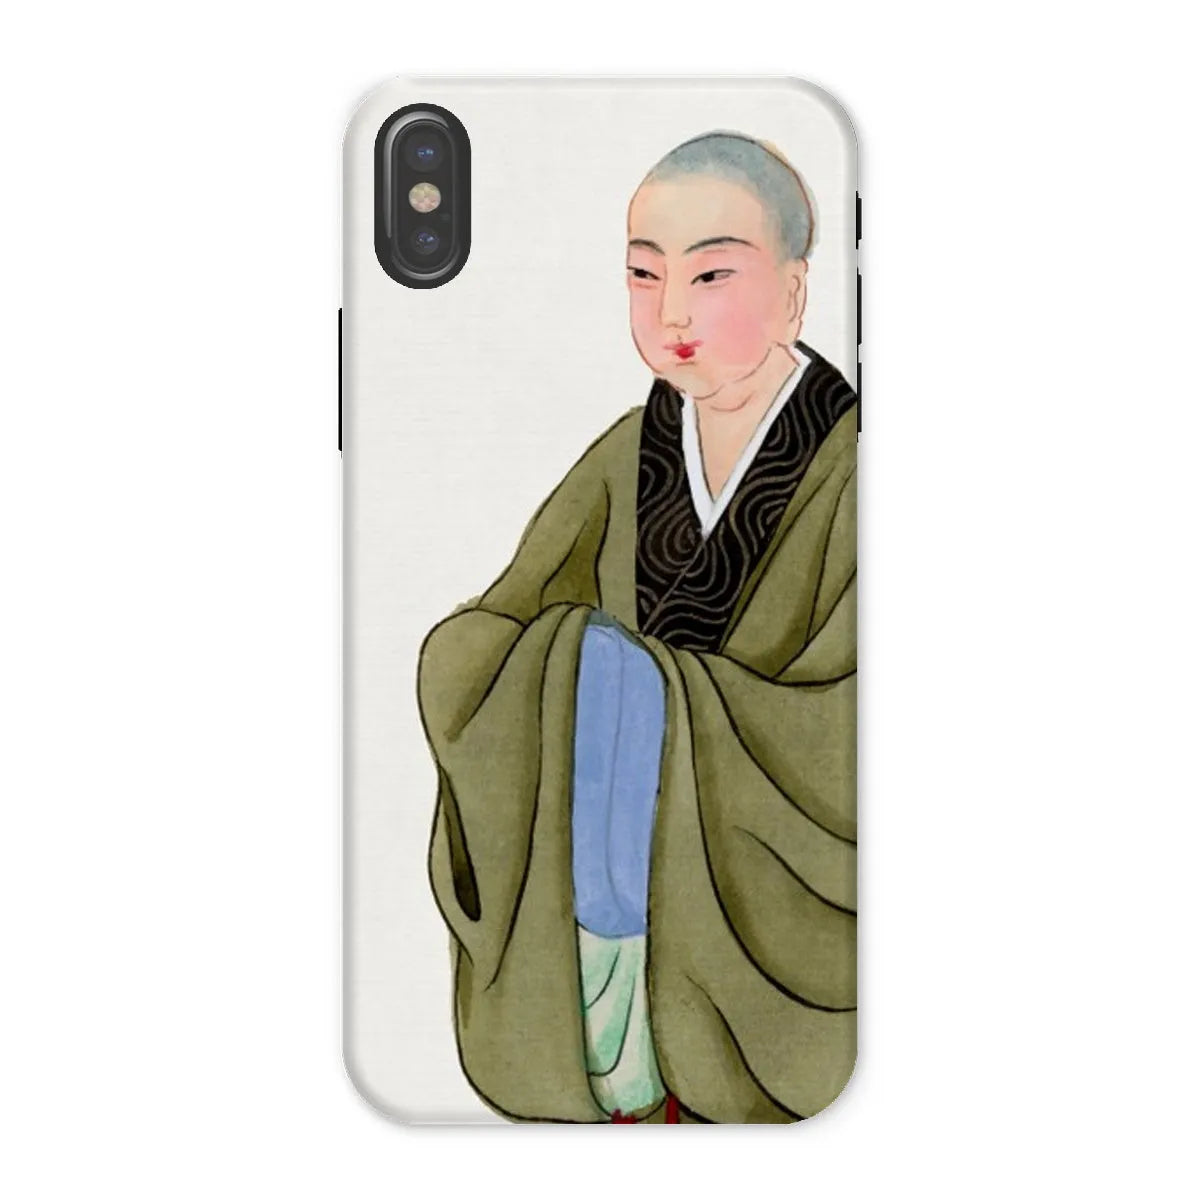 Buddhist Monk - Manchu Chinese Aesthetic Art Phone Case - Iphone x / Matte - Mobile Phone Cases - Aesthetic Art